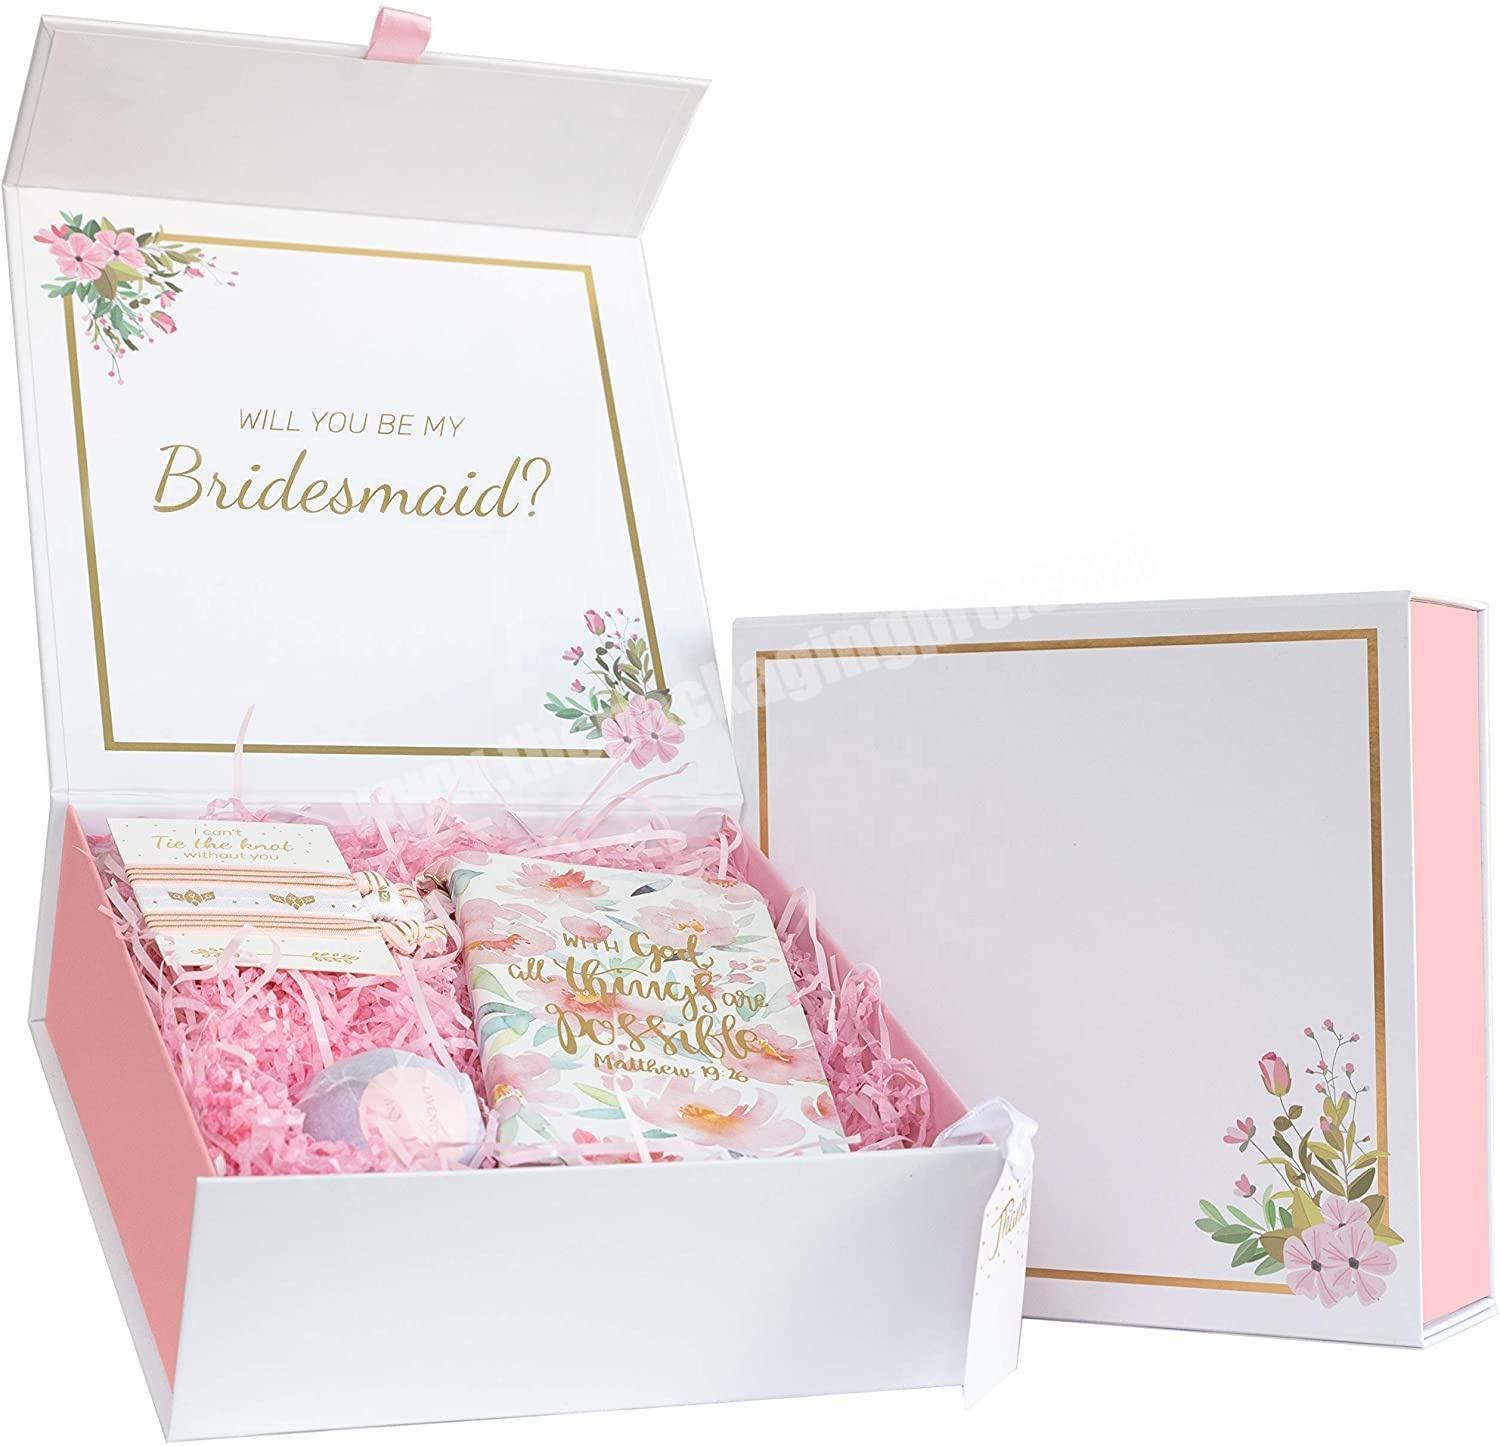 Pink floral bridesmaid proposal box elegant high end boxes will you be my bridesmaid